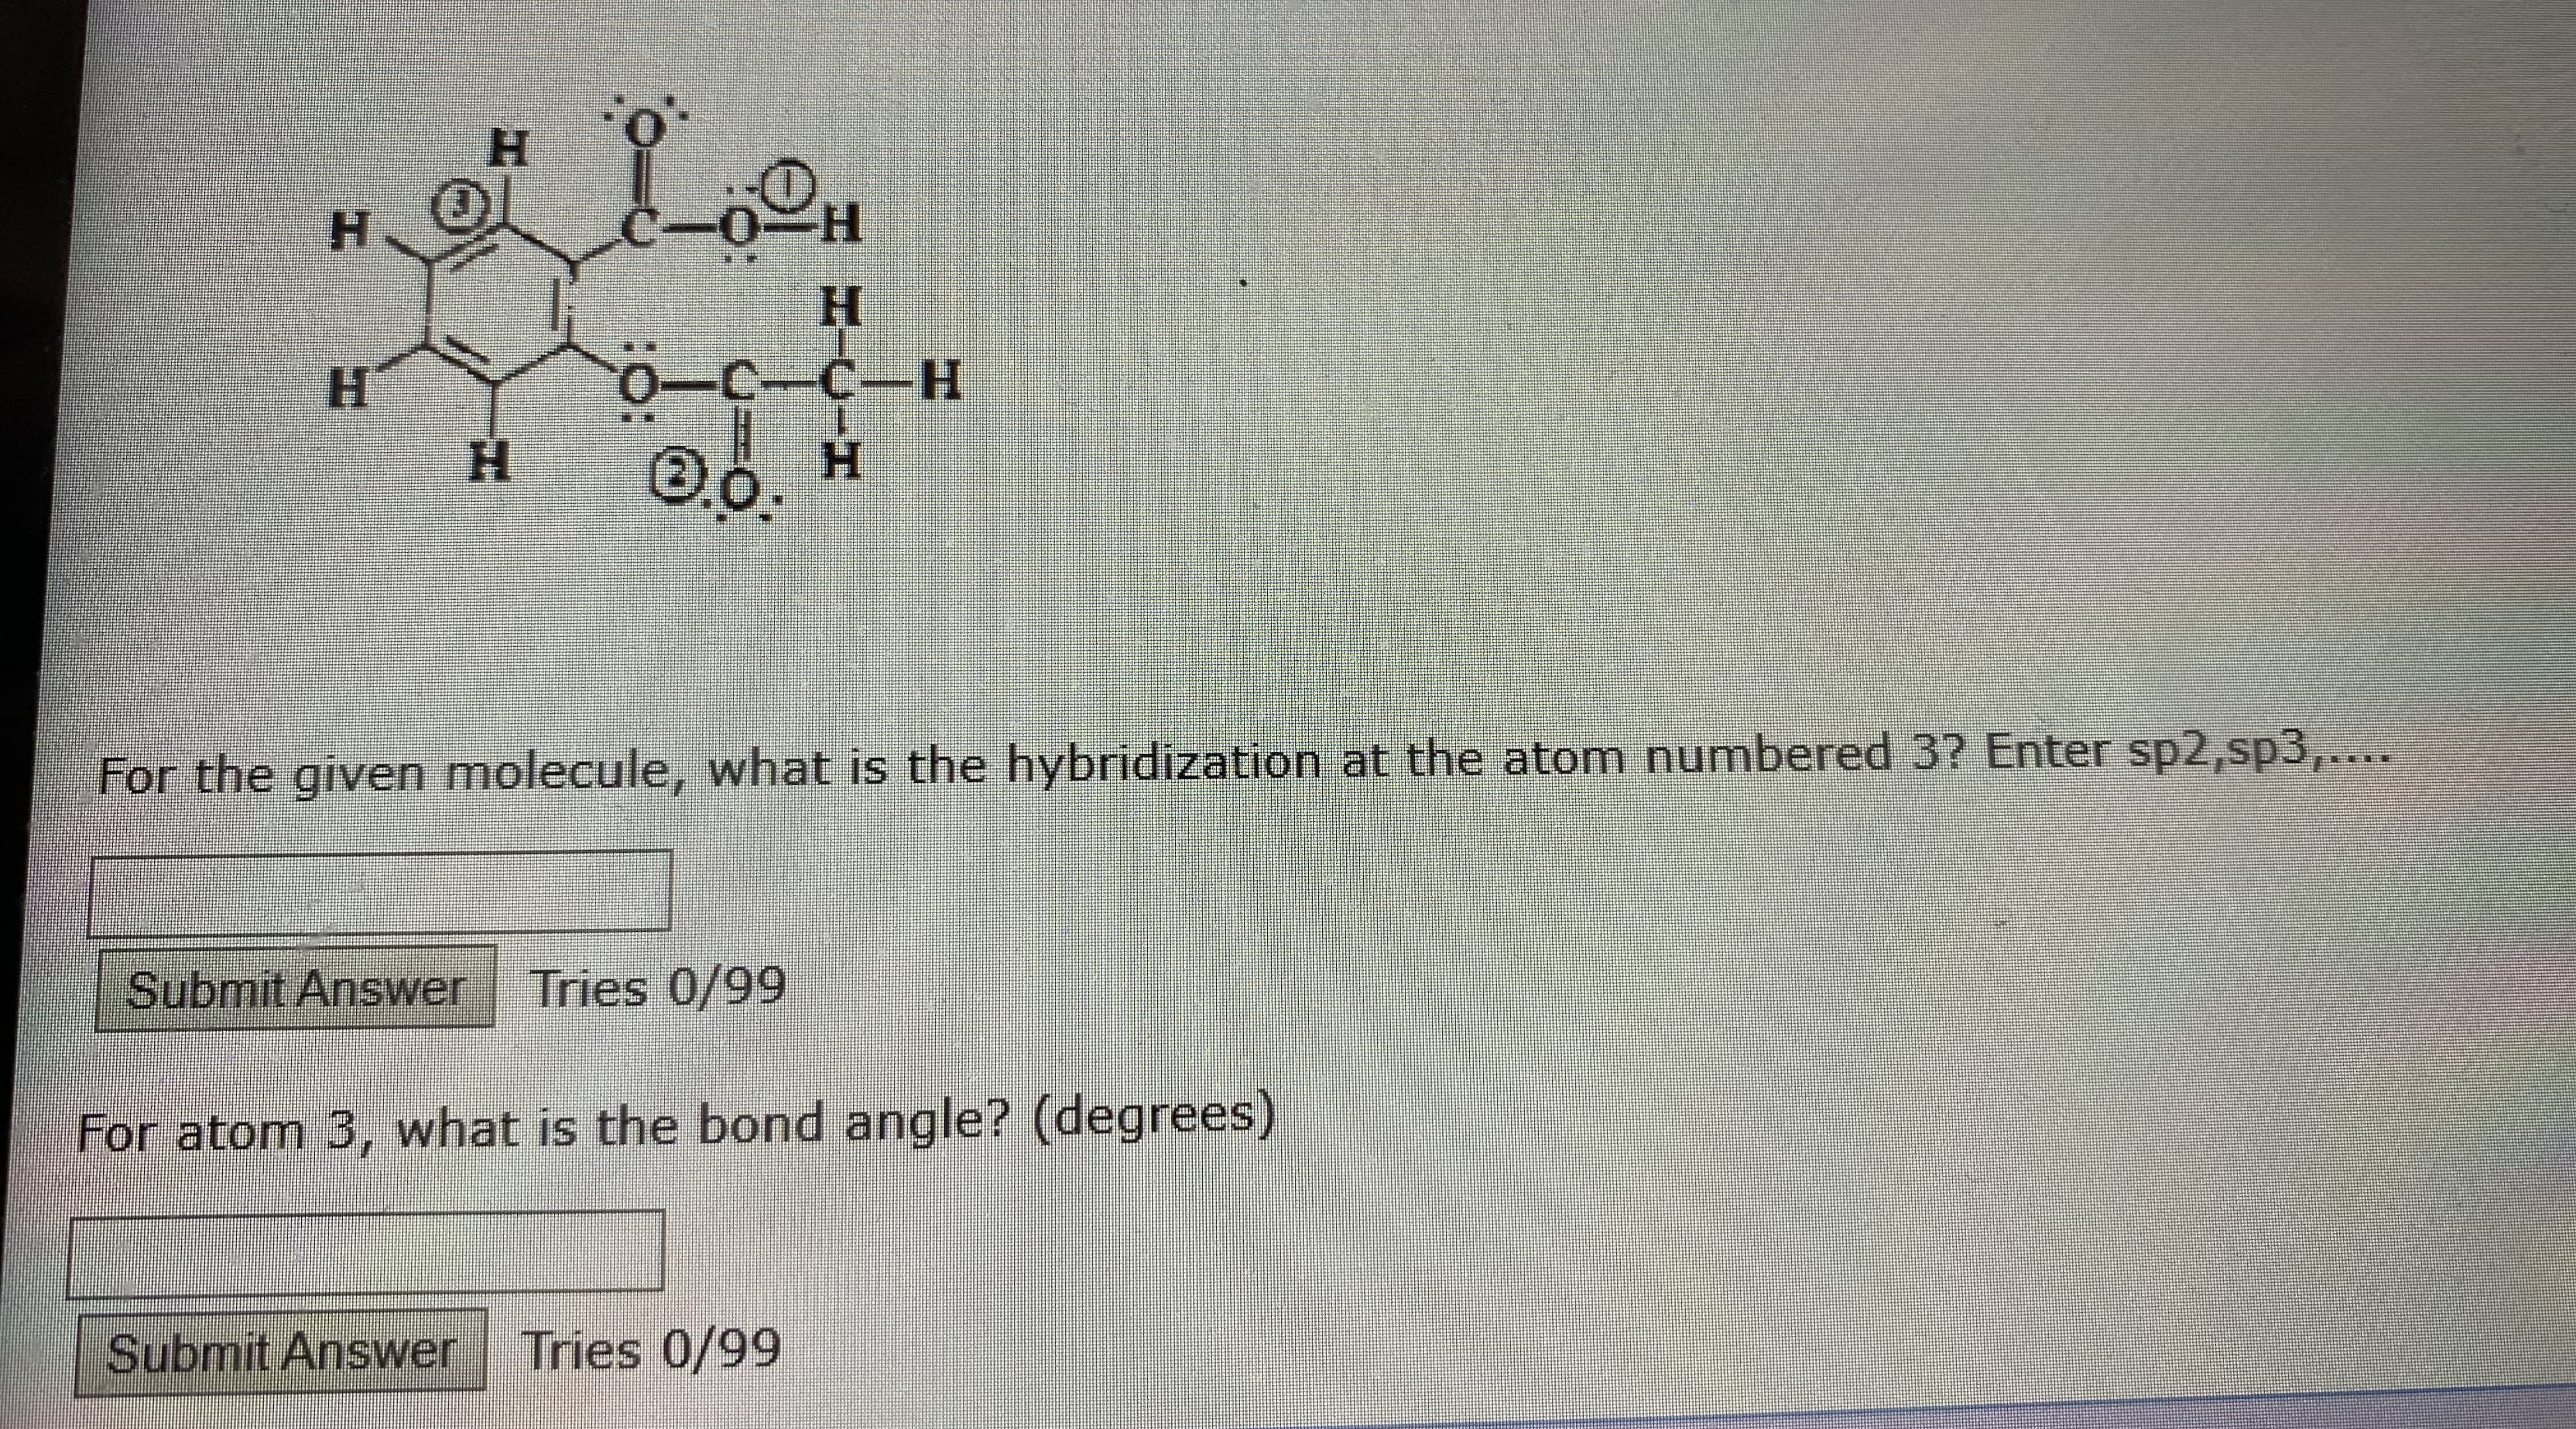 н
H.
H-
Н
н
-C-C-H
H.
H.
For the given molecule, what is the hybridization at the atom numbered 3? Enter sp2,sp3,....
Submit Answer Tries 0/99
For atom 3, what is the bond angle? (degrees)
Submit Answer Tries 0/99
:O:
